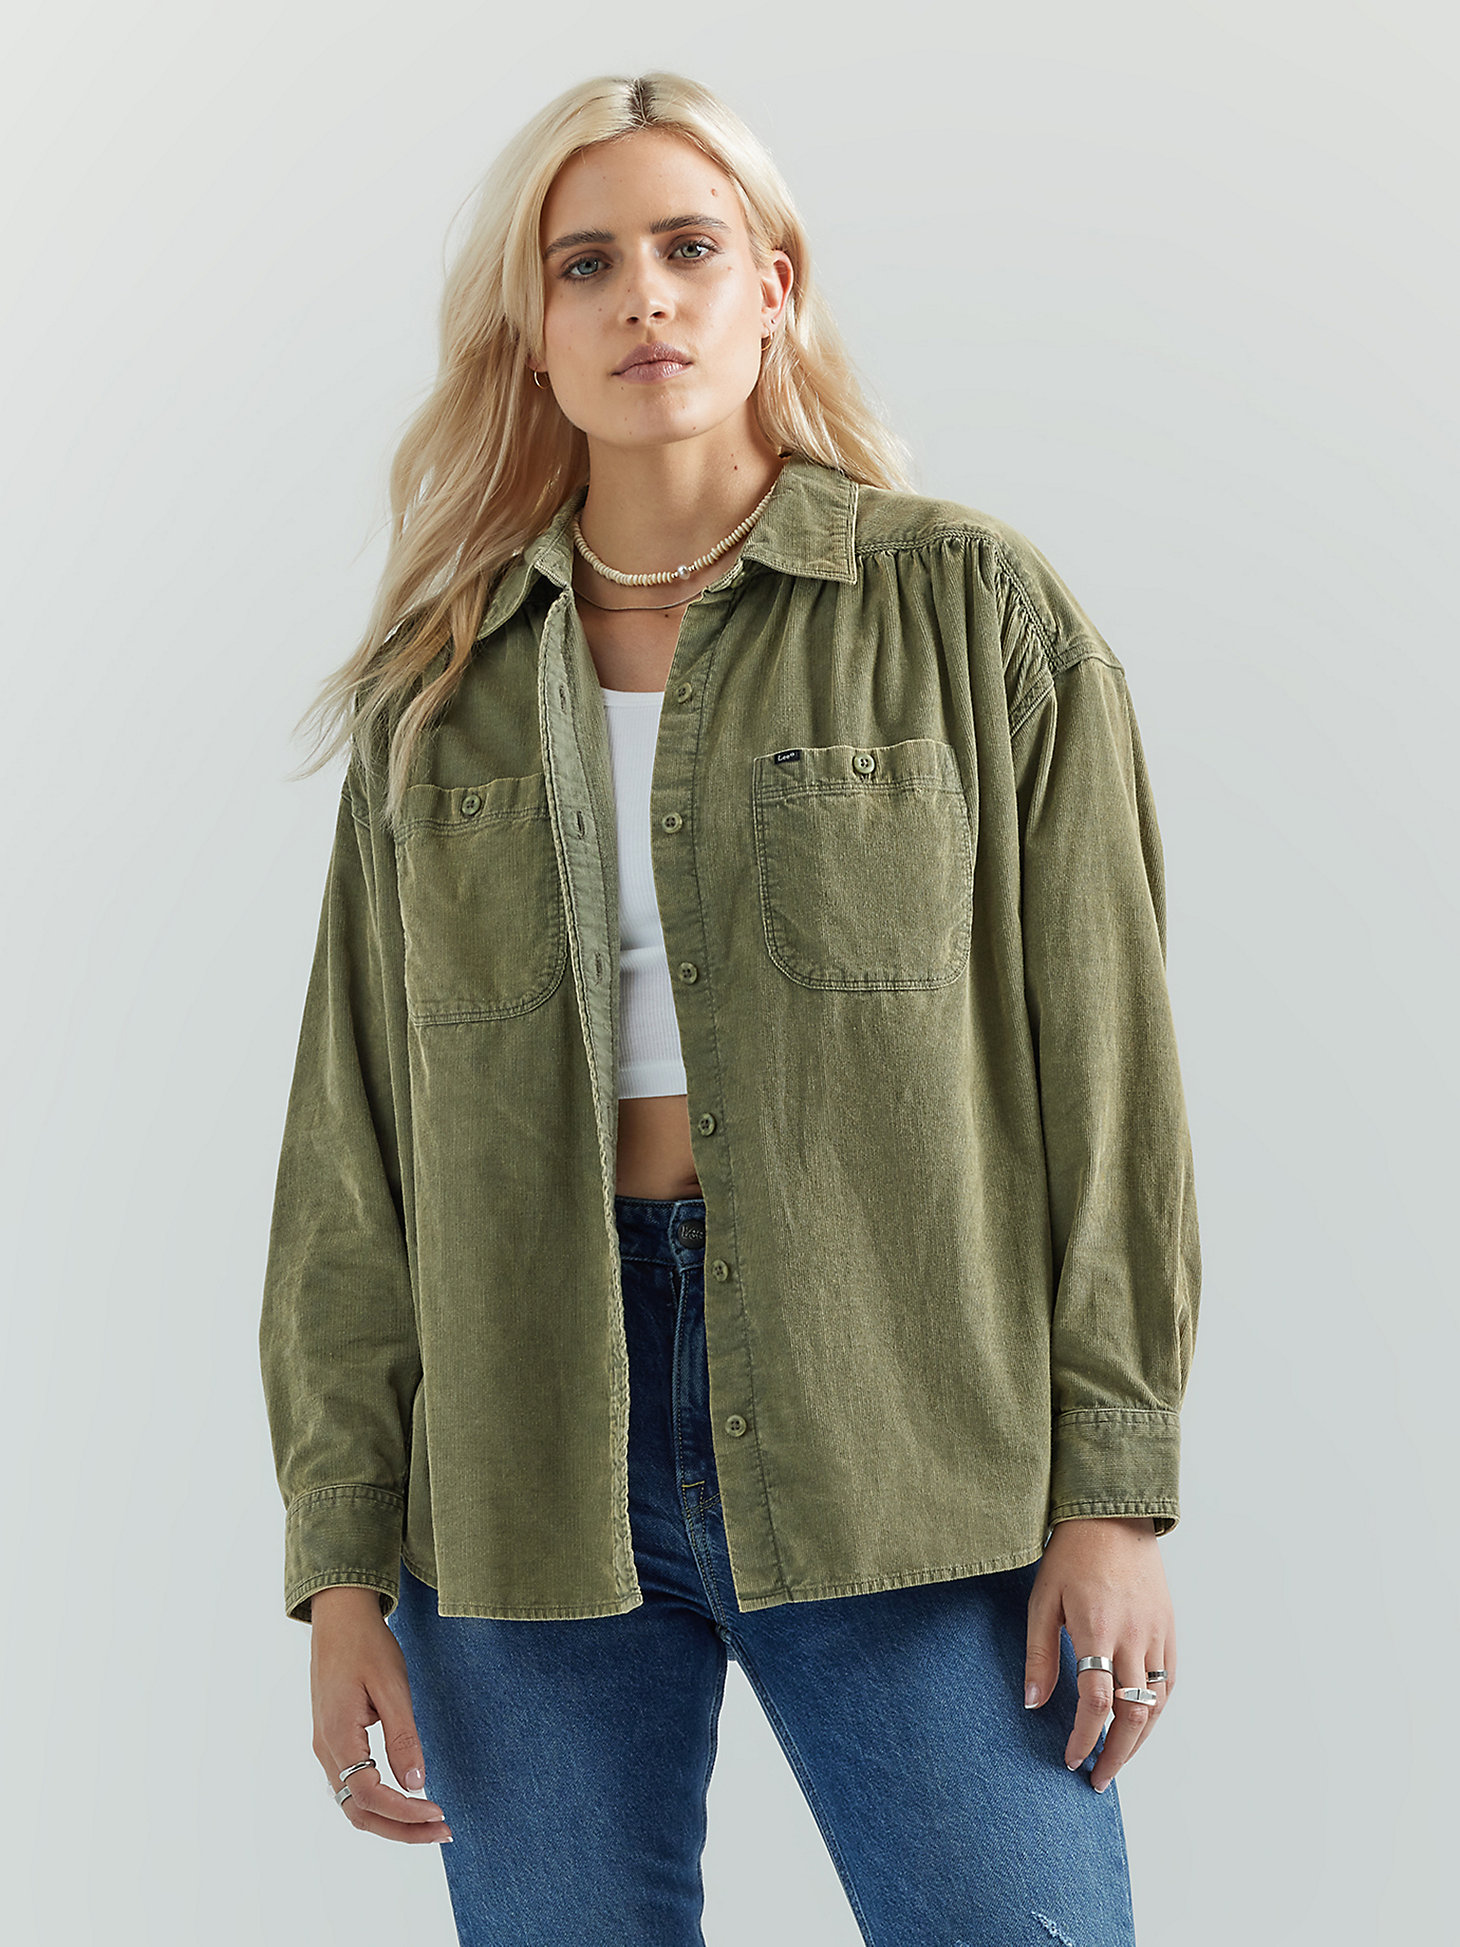 Women's Frontier Shirred Corduroy Button Down Shirt in Olive Grove alternative view 3